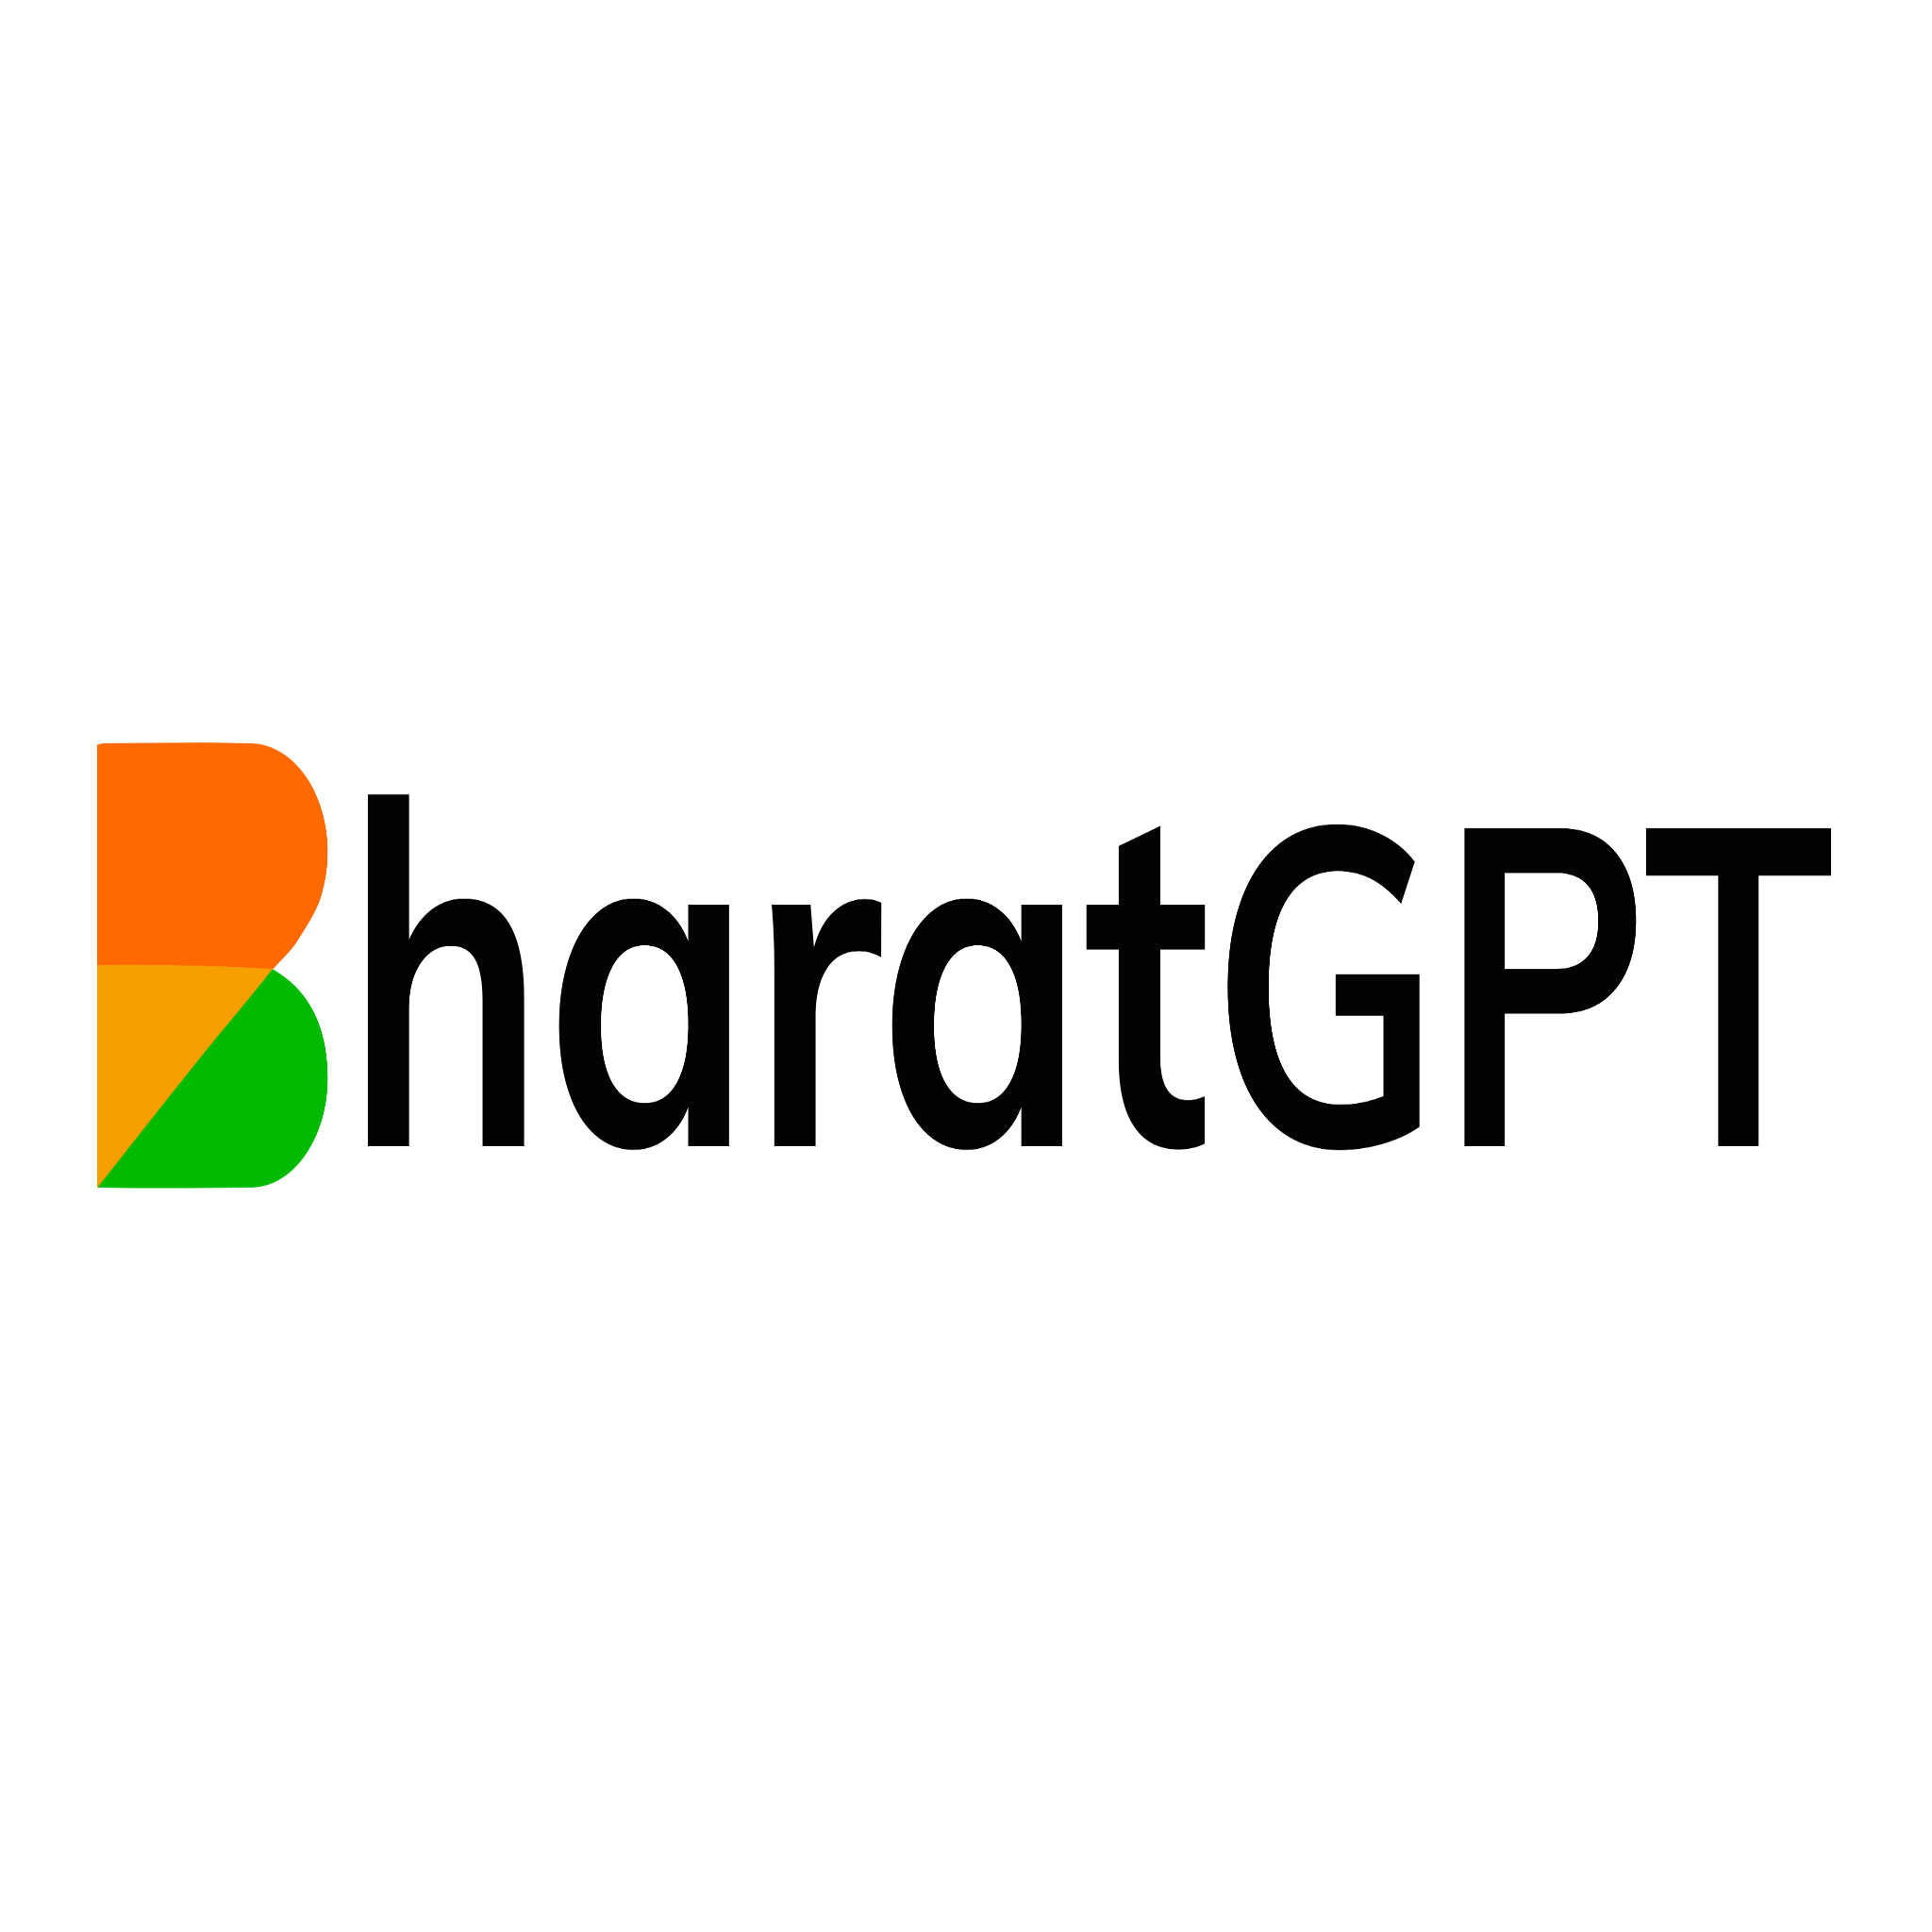 India is now ready with BharatGPT: India’s first Large Language Model (Generative AI)-thumnail